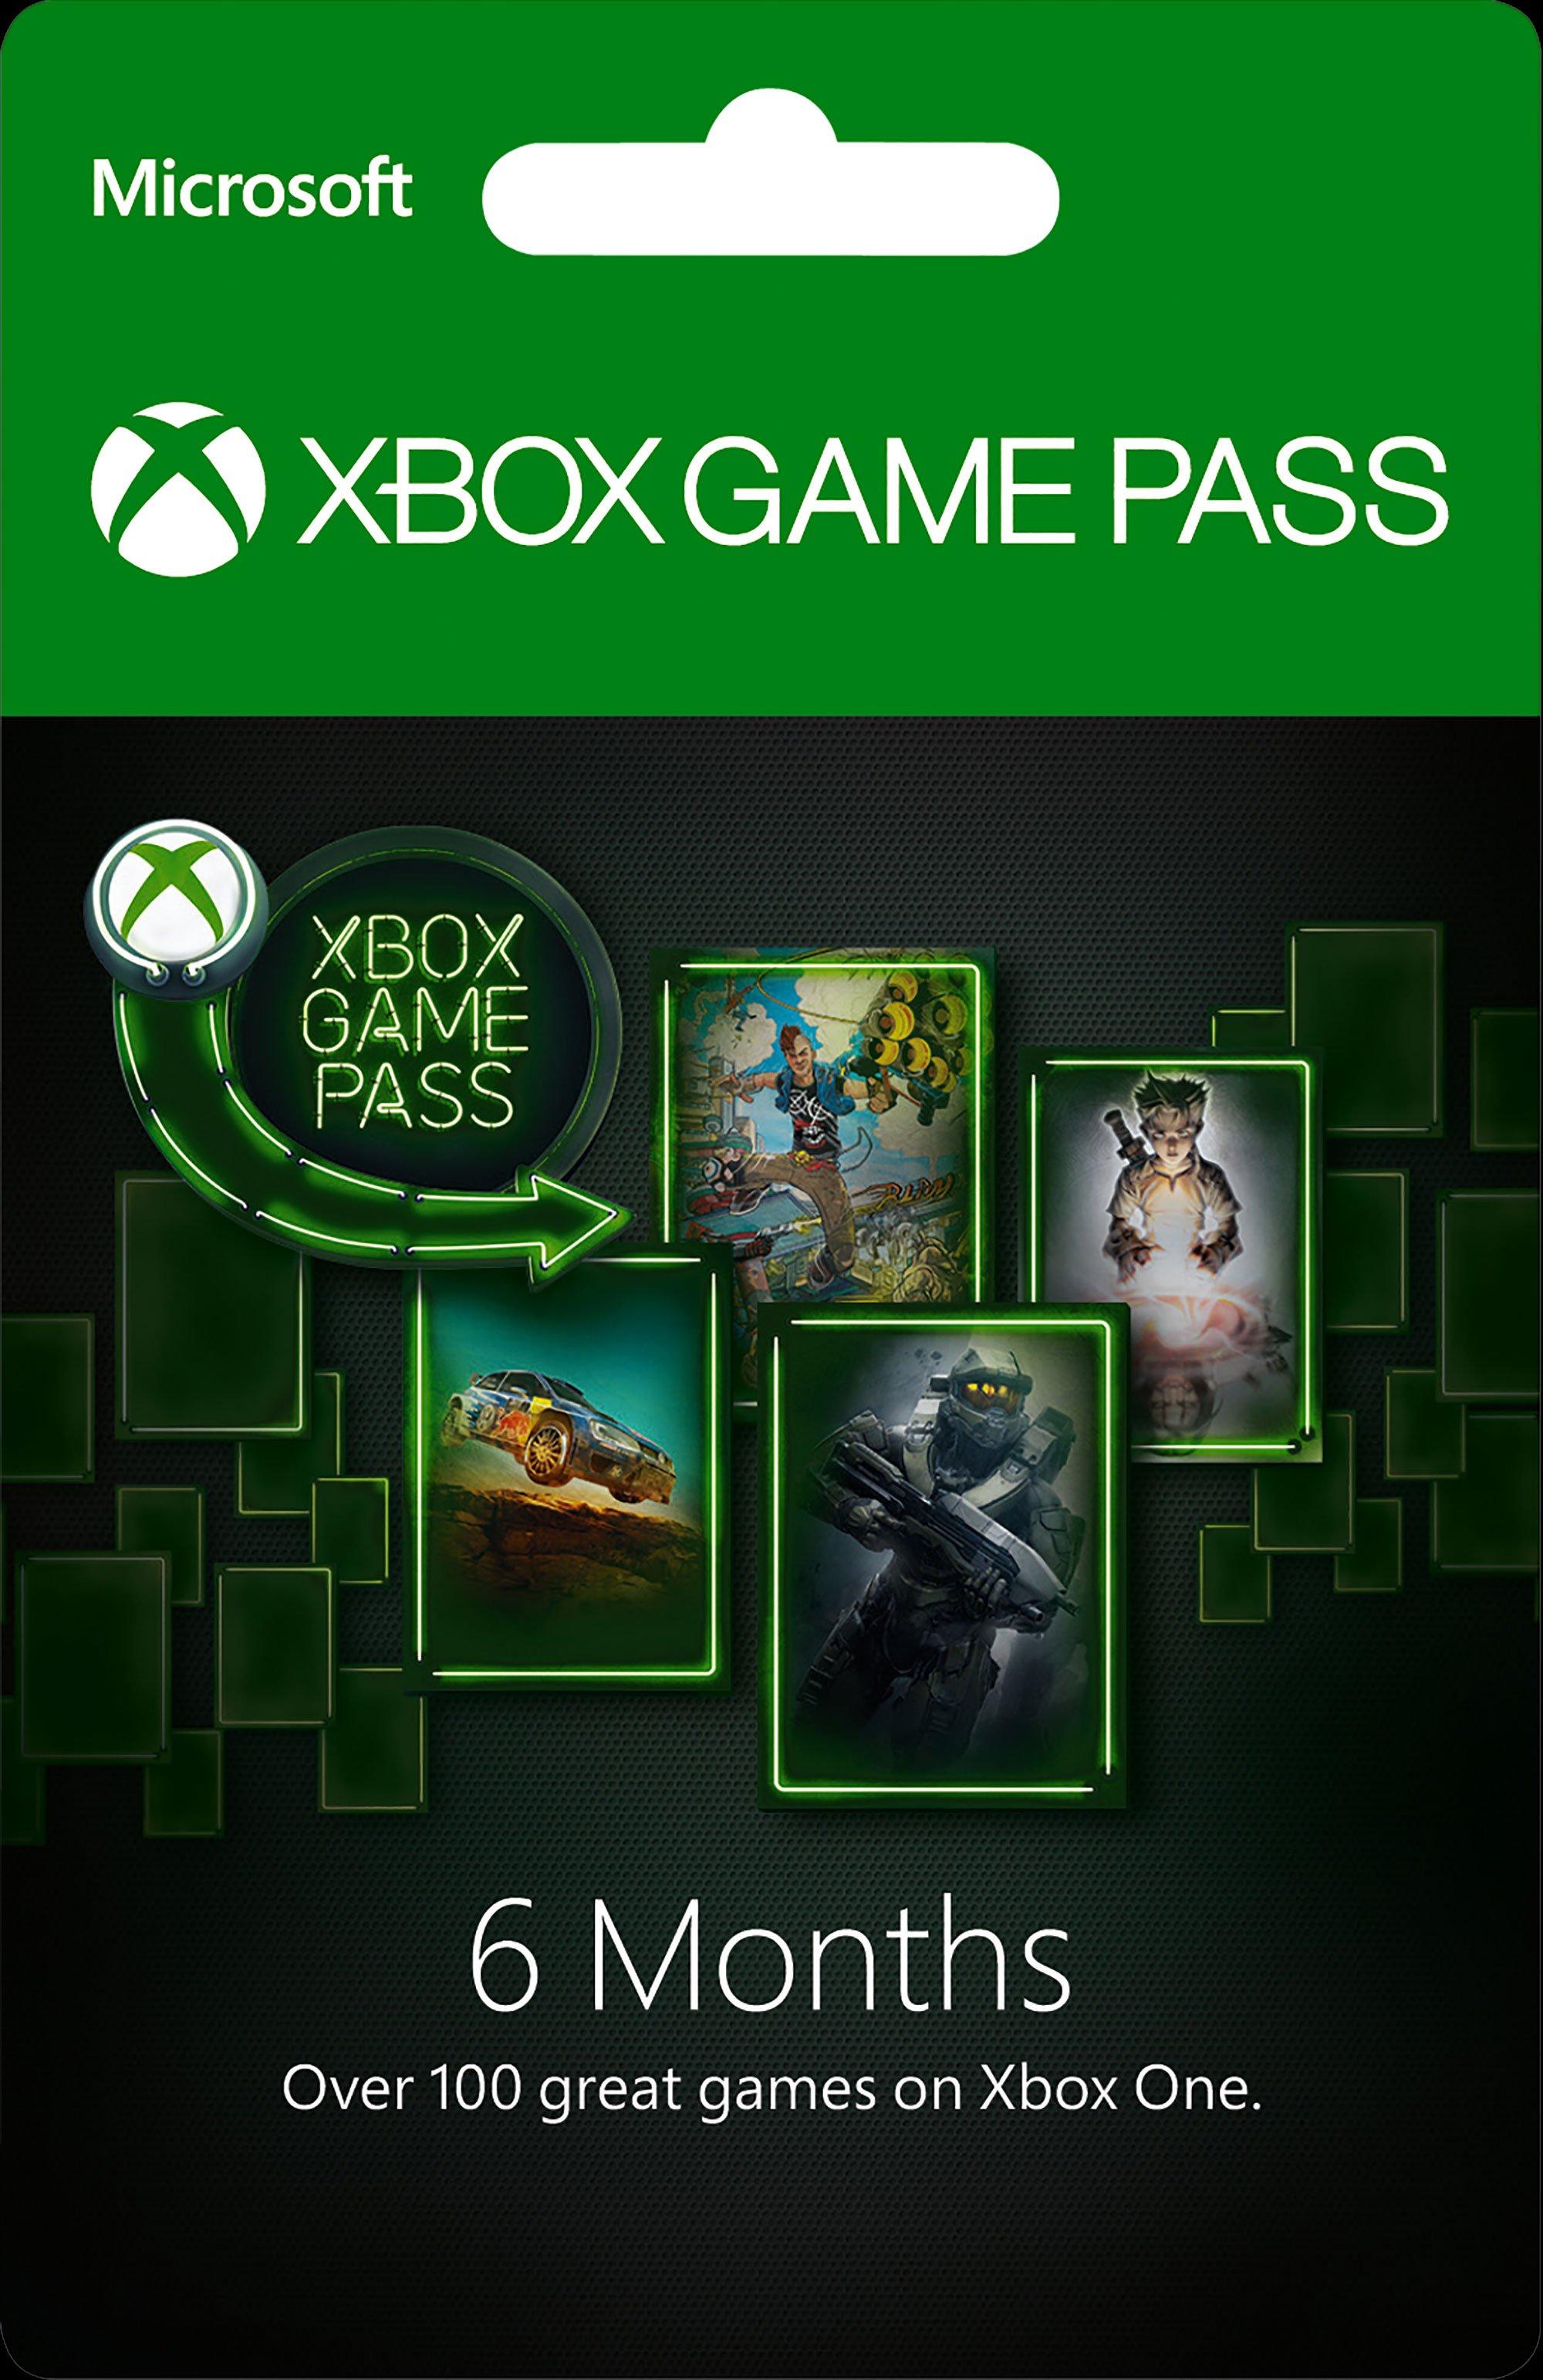 xbox game pass ultimate monthly price